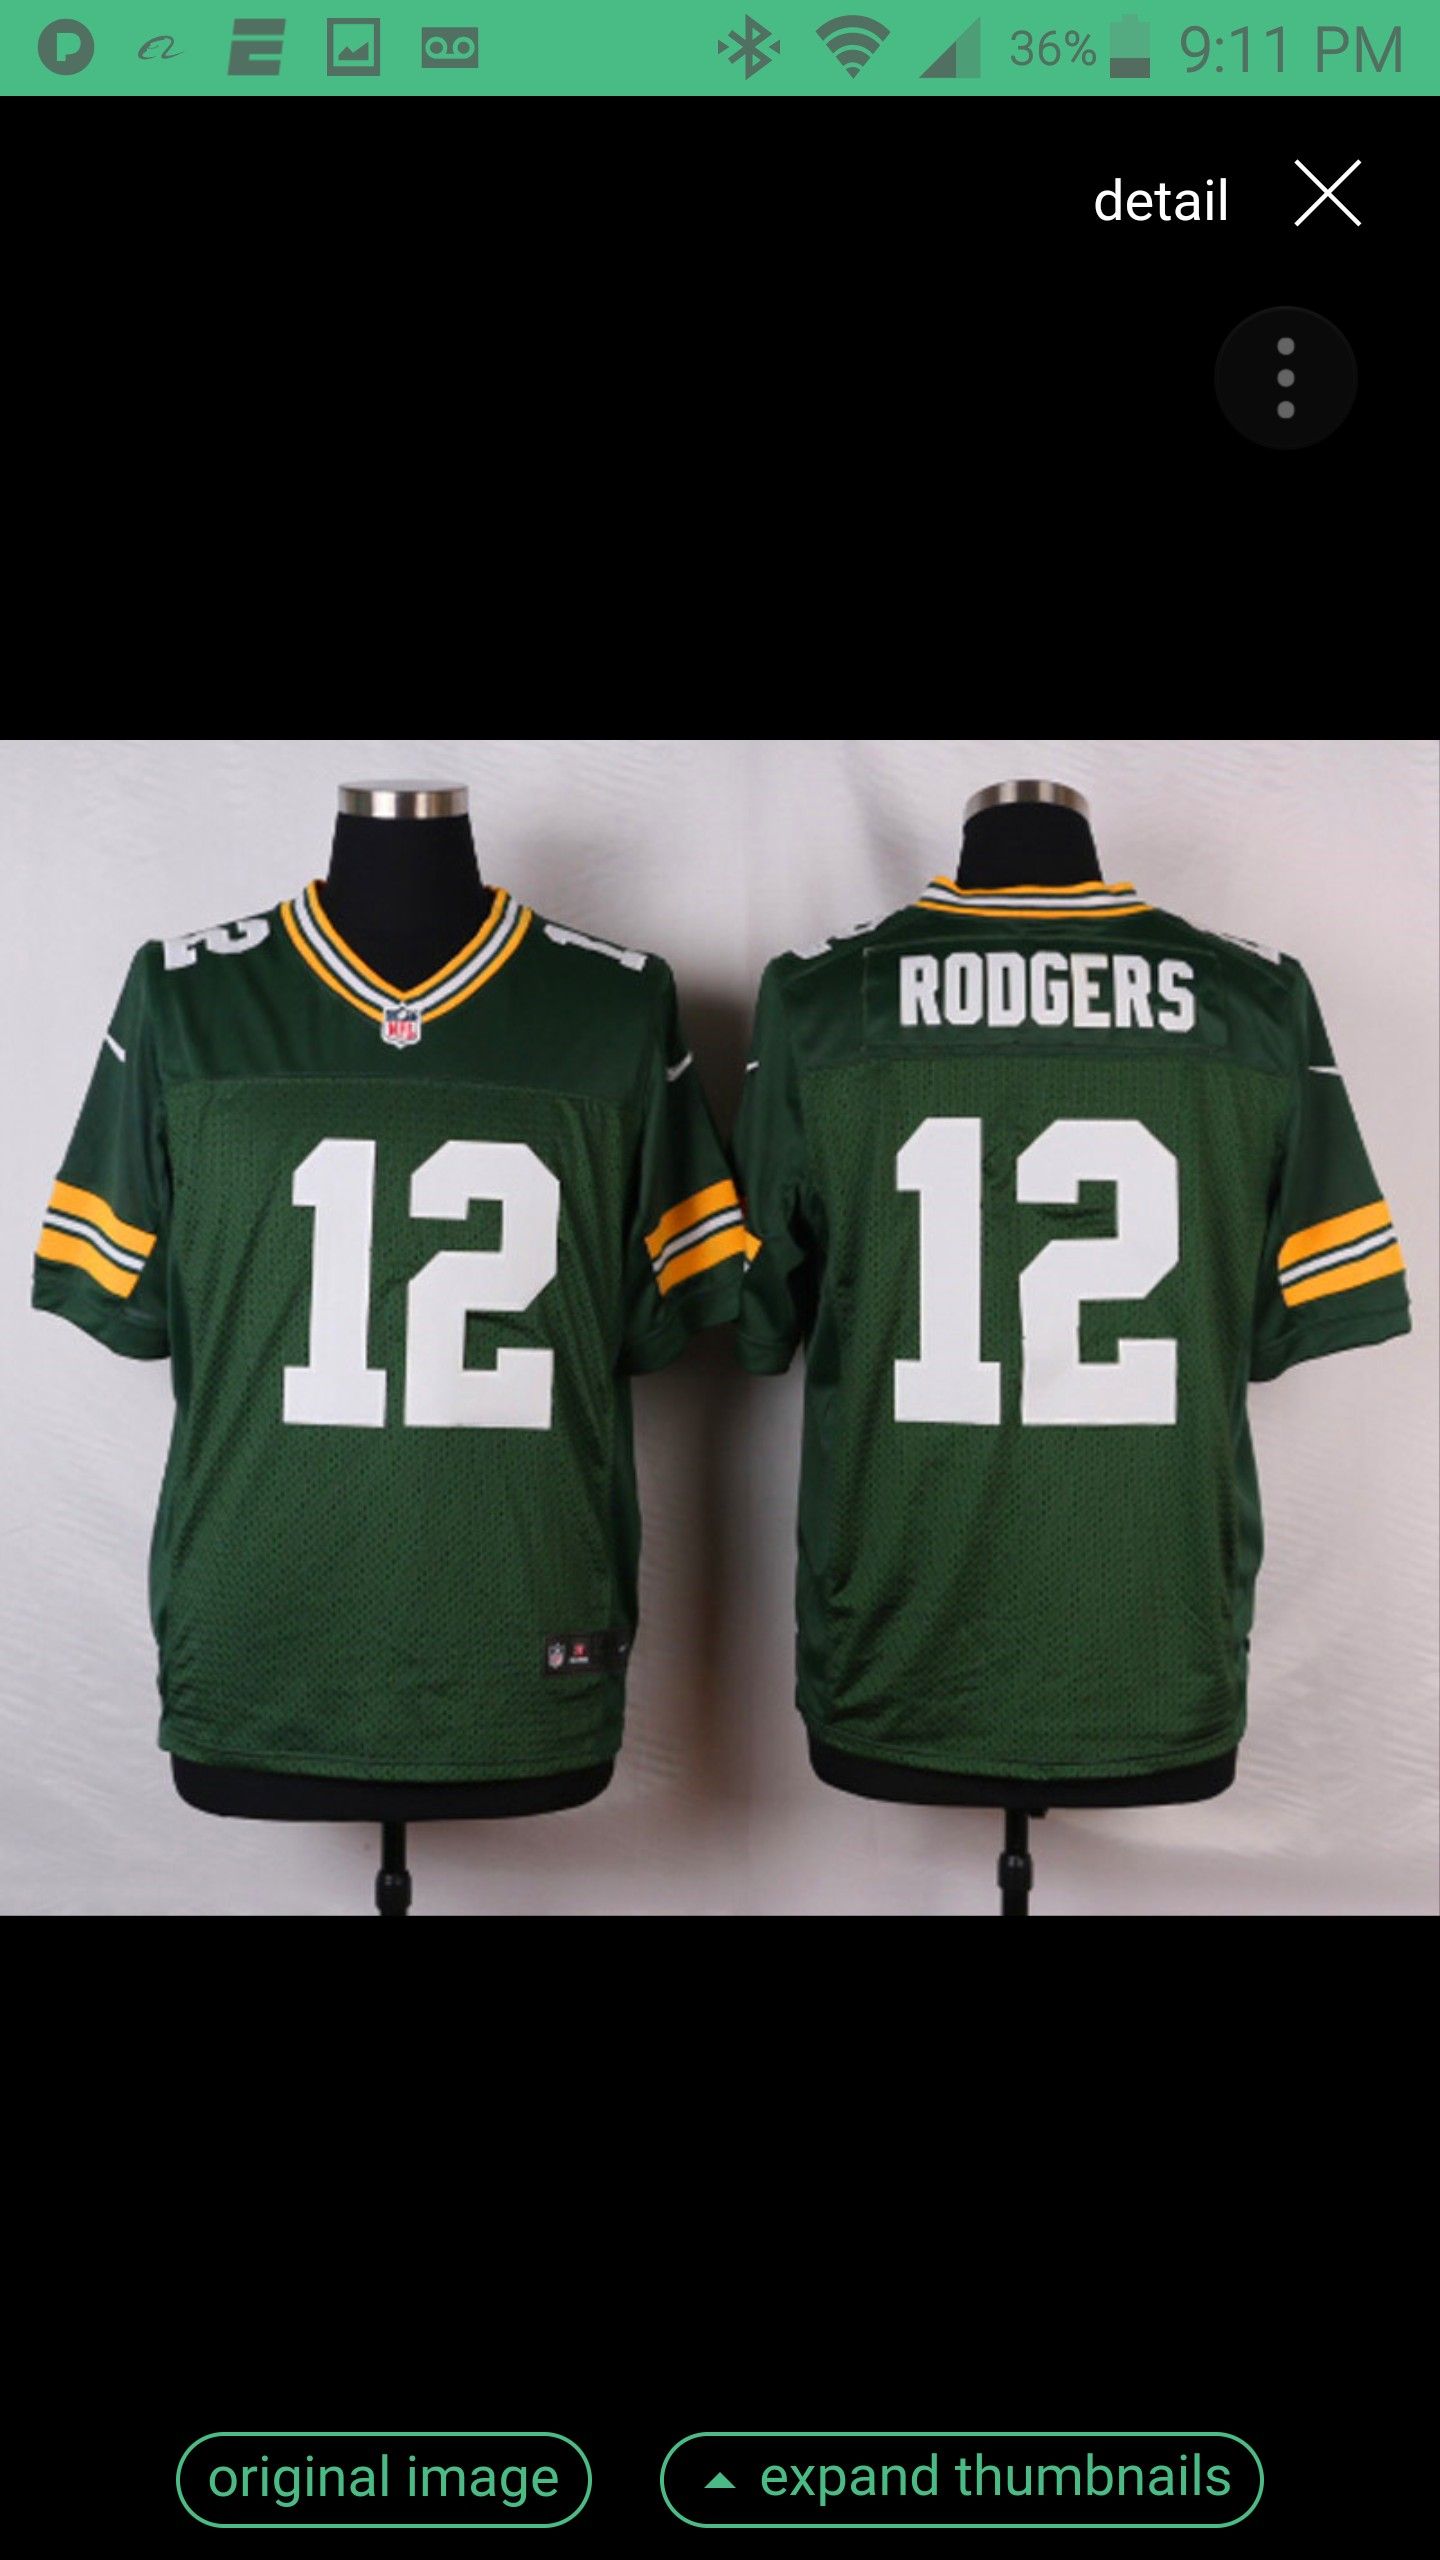 PACKERS ROGERS JERSEY SIZE MED N XL N 2XL N 4XL 100% STITCHED